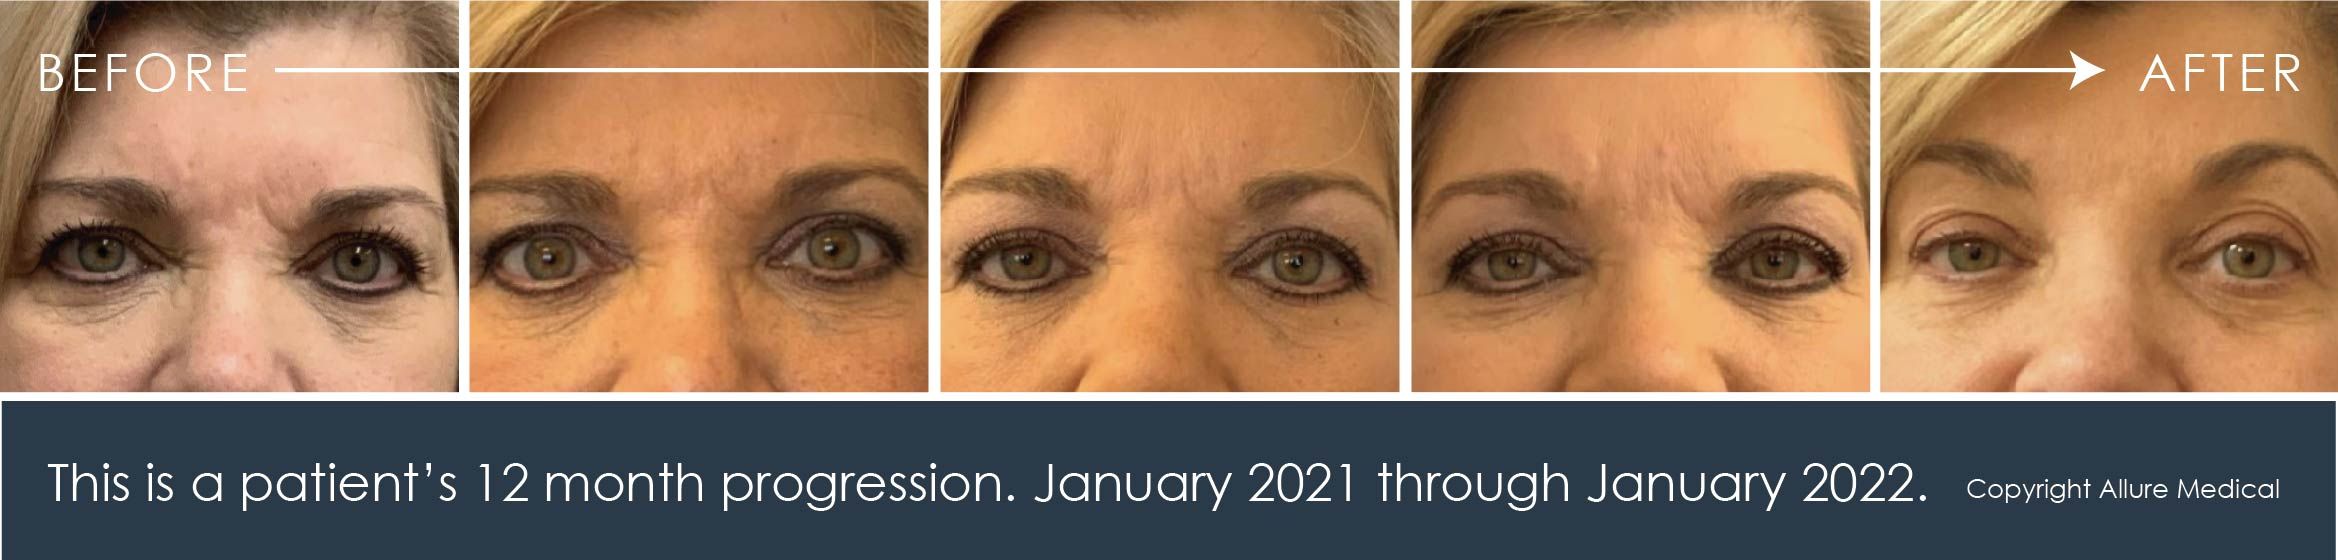 This is a 12 month progression of droopy eye treatment at Allure Medical